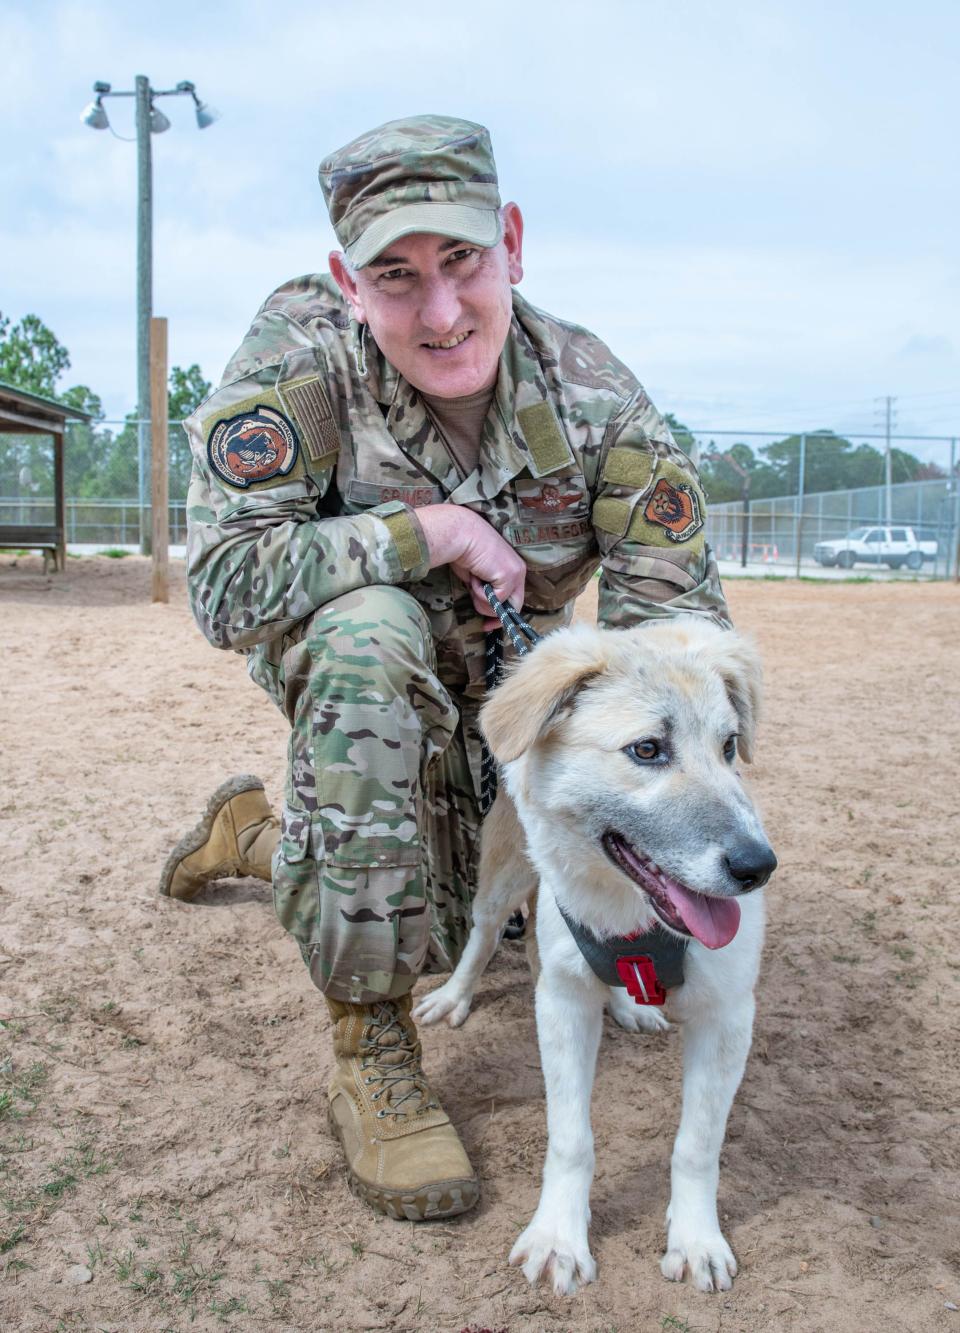 Air Force Senior Master Sgt. Chris Grimes is reunited with his dog Tucker at Navarre Central Bark in Navarre, Florida on Thursday, Feb. 16, 2023.